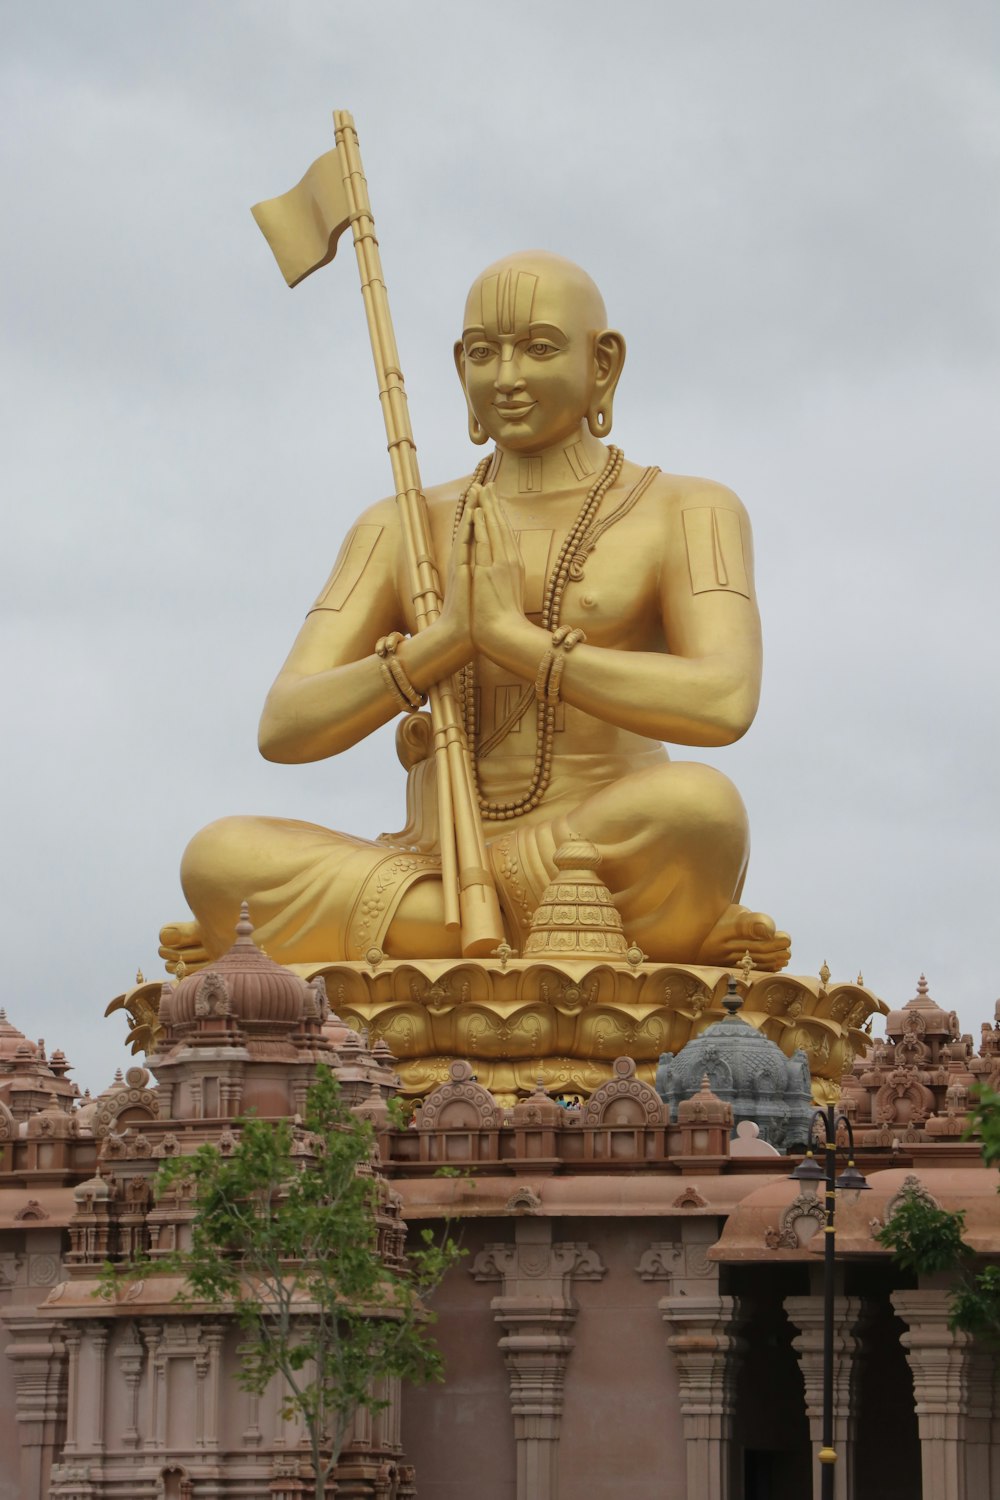 a golden statue of a person holding a flag